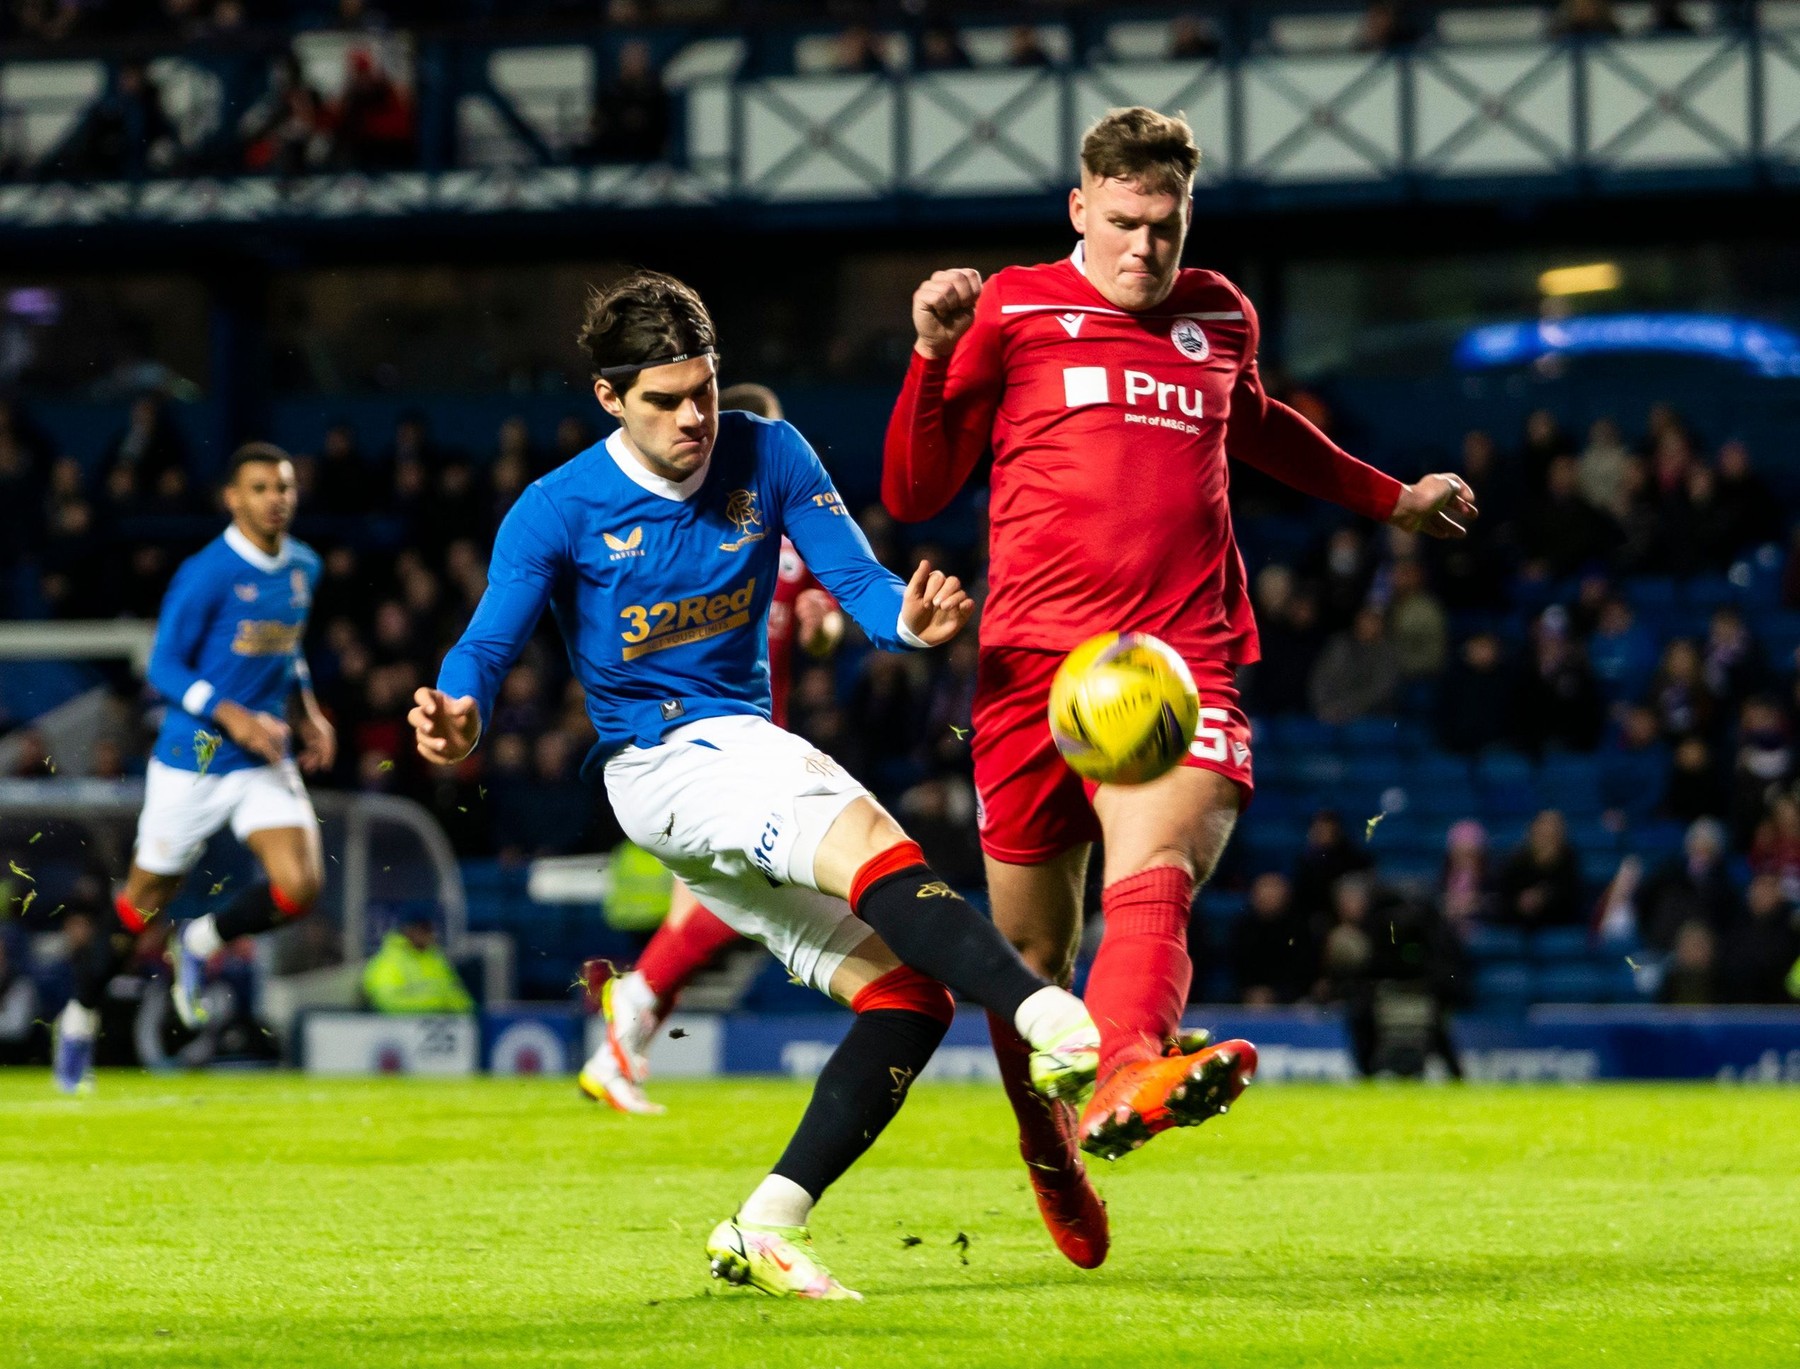 Rangers Midfielder Ianis Hagi takes a shot at goal
Rangers v Stirling Albion, Scottish Cup, Football, Ibrox Stadium, Glasgow, Scotland, UK - 21 Jan 2022,Image: 655224367, License: Rights-managed, Restrictions: EDITORIAL USE ONLY No use with unauthorised audio, video, data, fixture lists, club/league logos or 